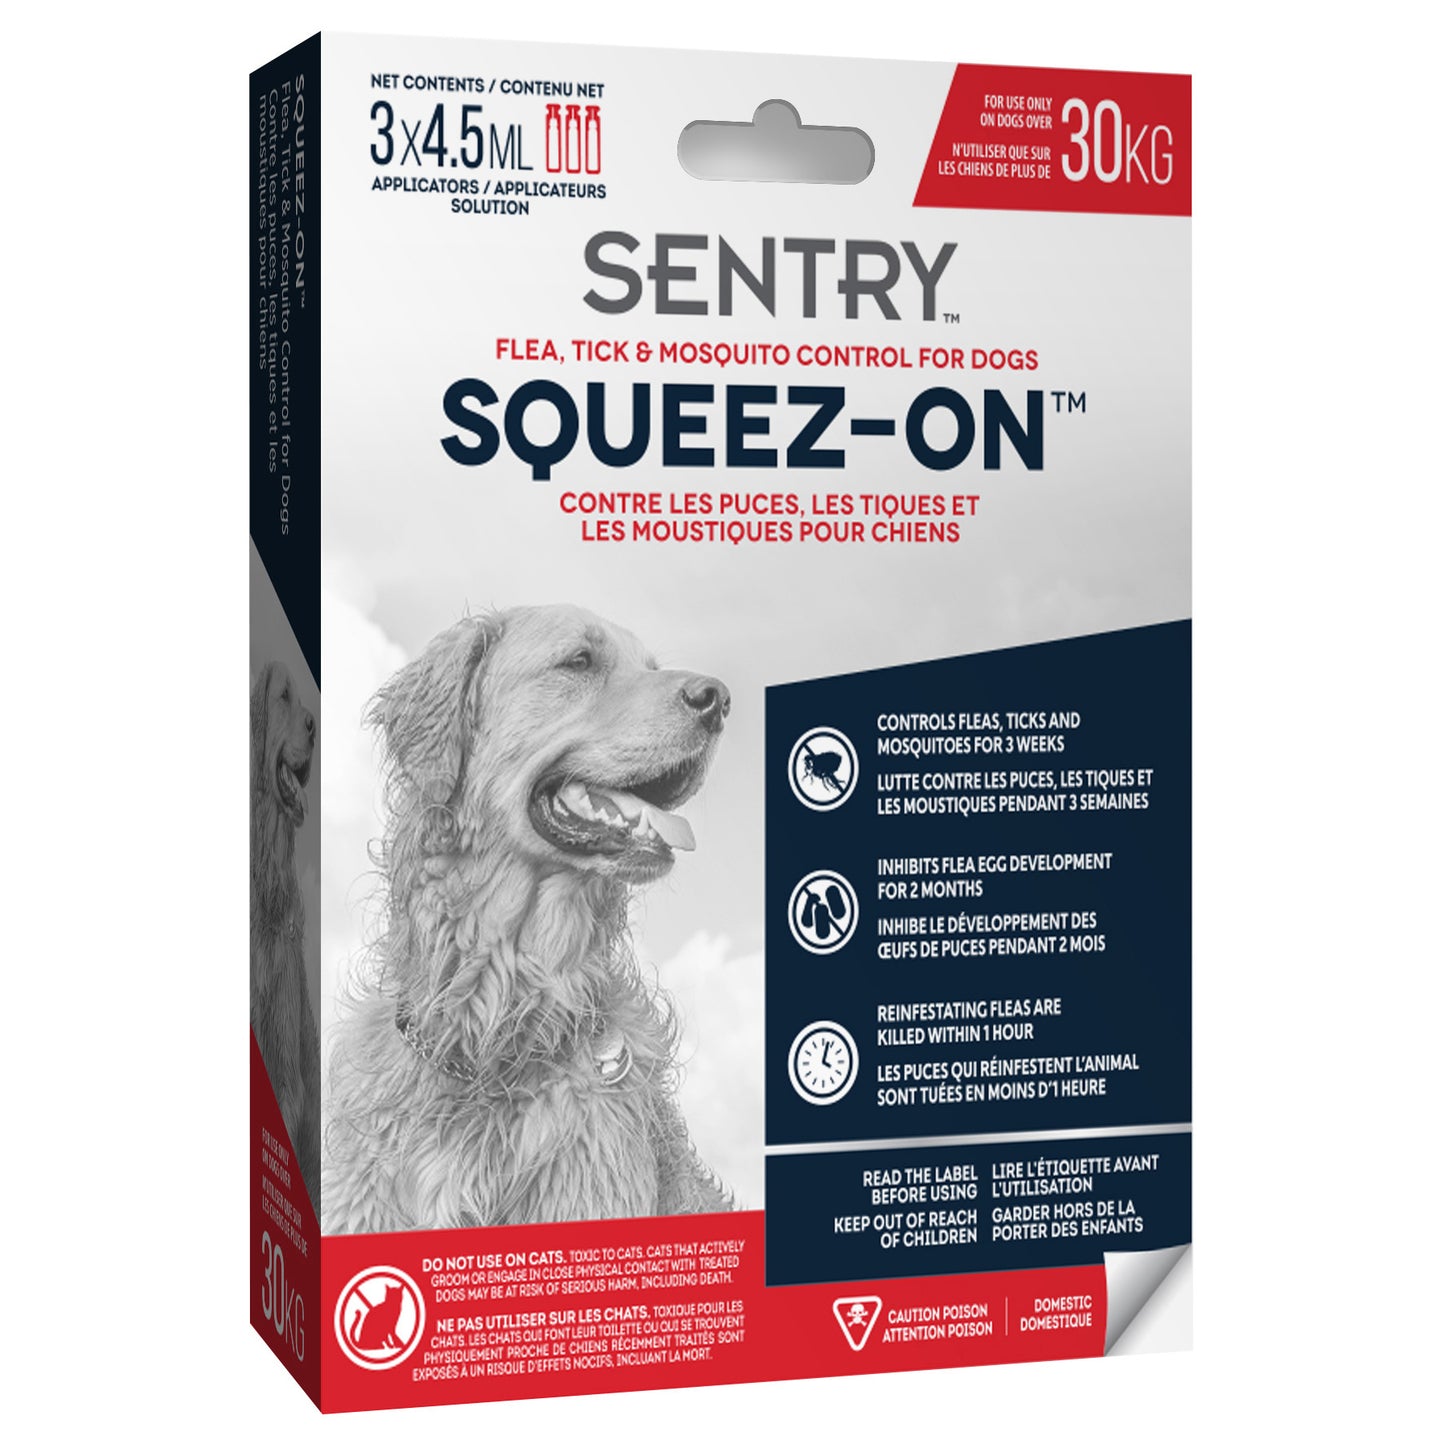 Sentry® Squeez-On™ Flea, Tick & Mosquito Control for Dogs - Critter Country Supply Ltd.